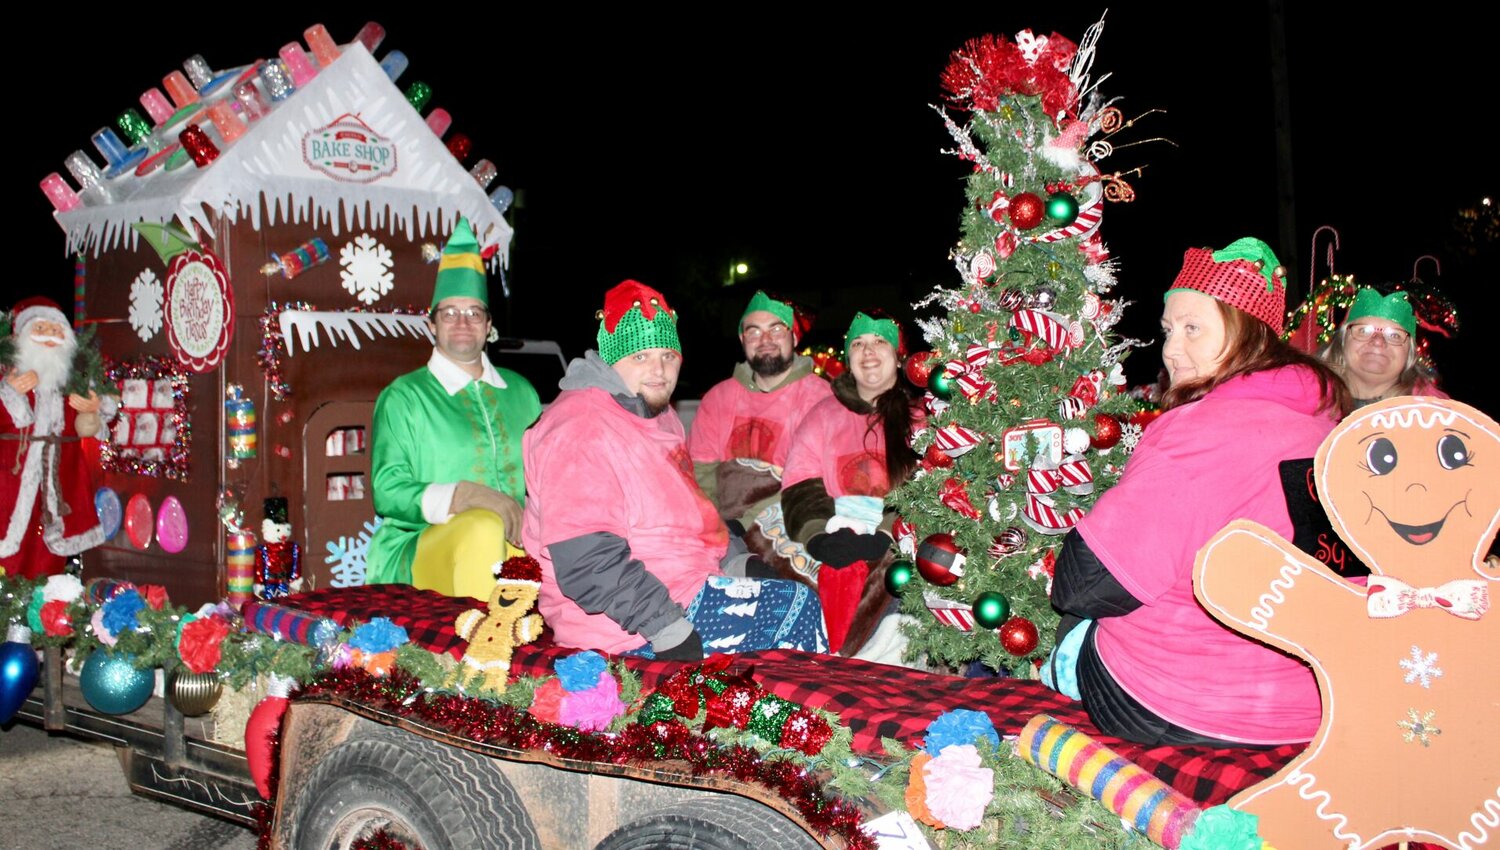 This float with a "Buddy the Elf" theme, entered by West Plains Special Olympics, won third place in this year's Willow Springs Christmas Parade, organized by the Willow Springs Chamber of Commerce. The overall theme of the parade was "Christmas at the Movies."